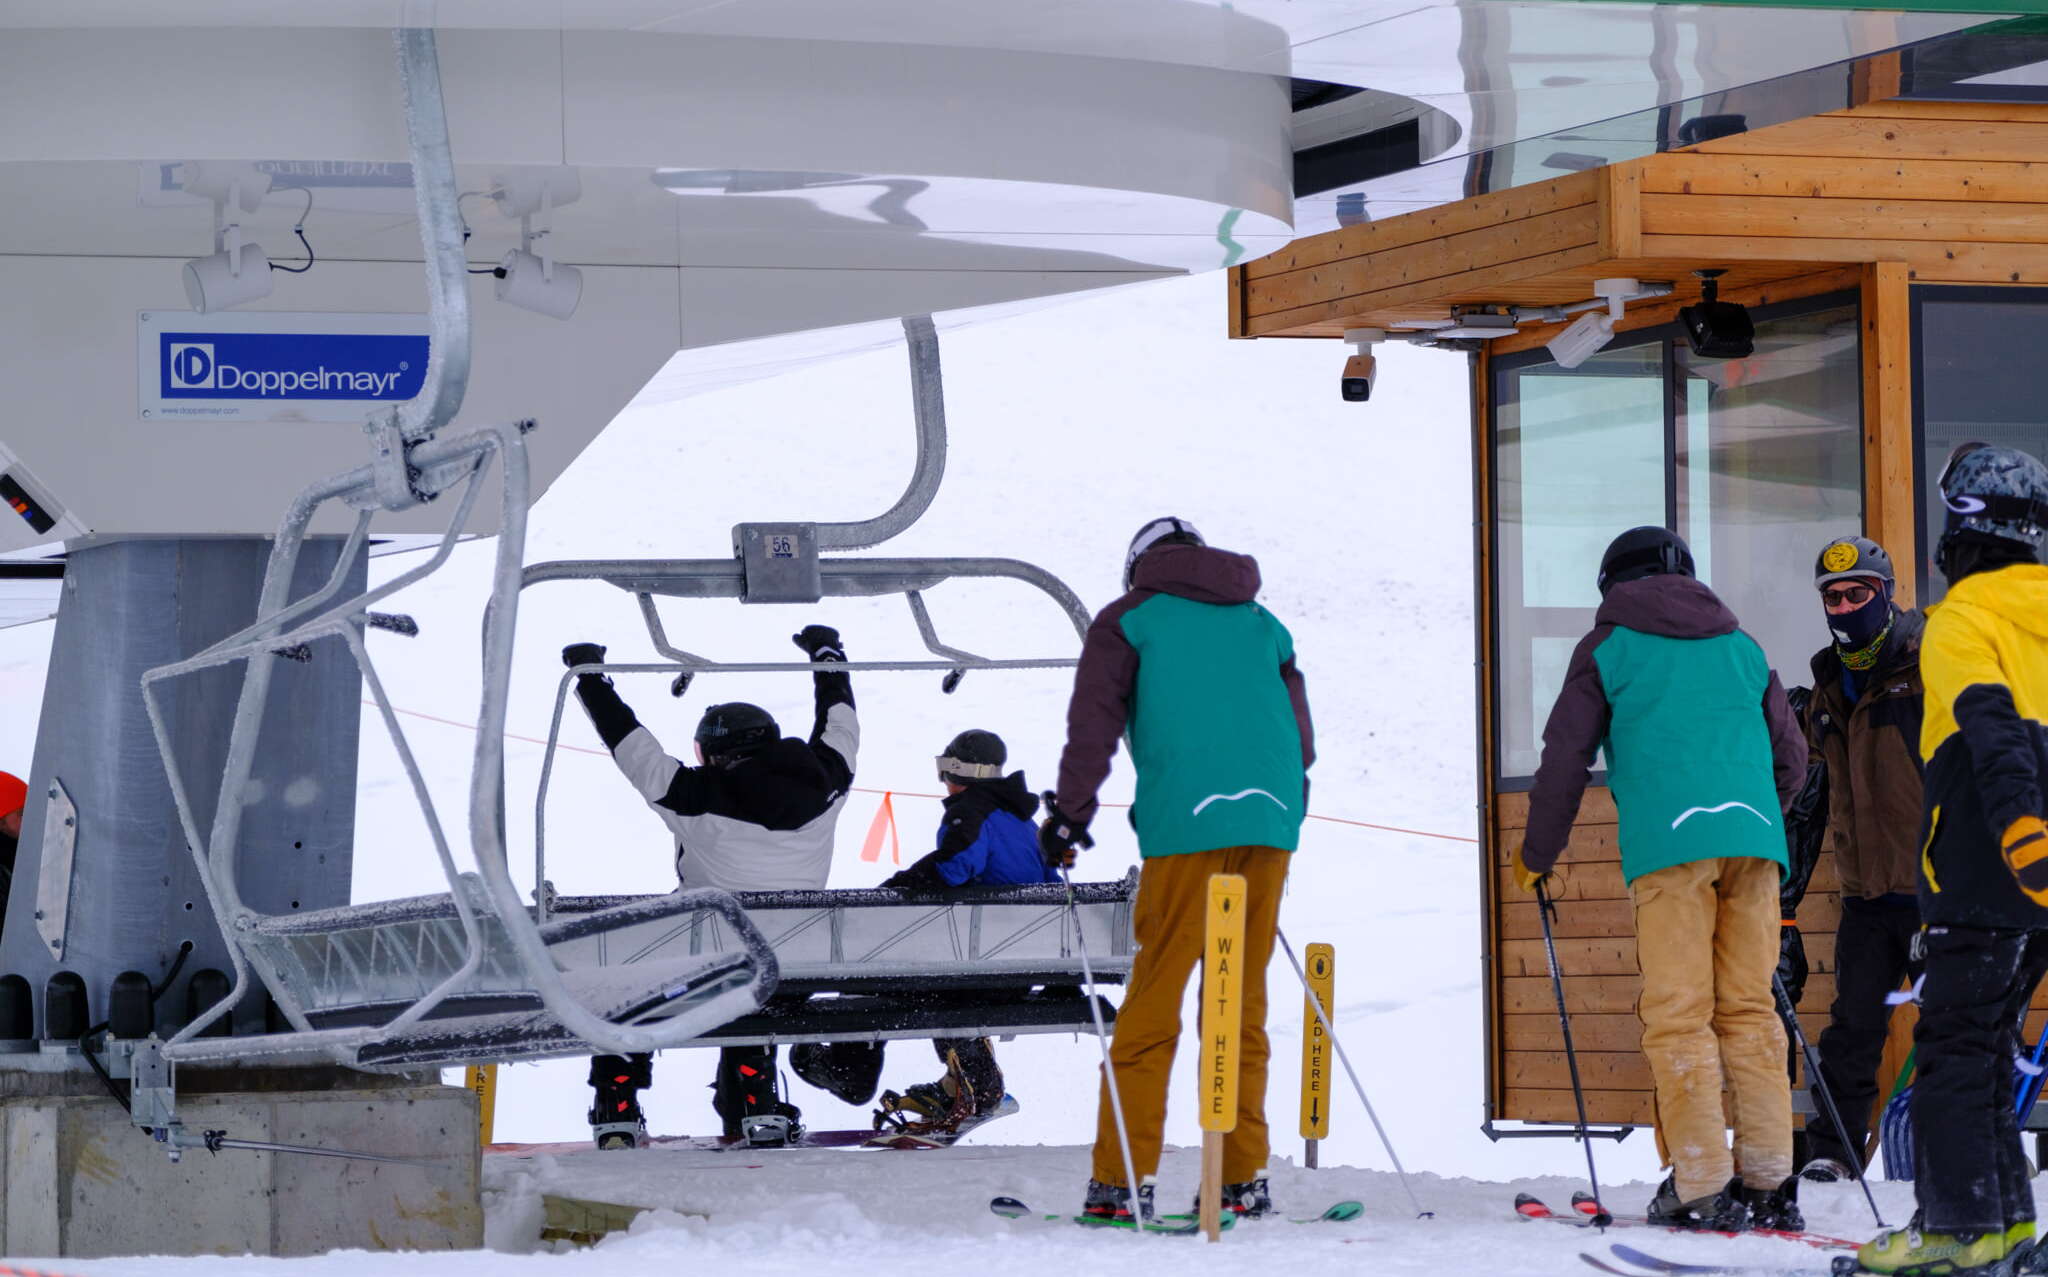 people getting on a ski lift with their arms raised in triump with a snowy mountain in the background